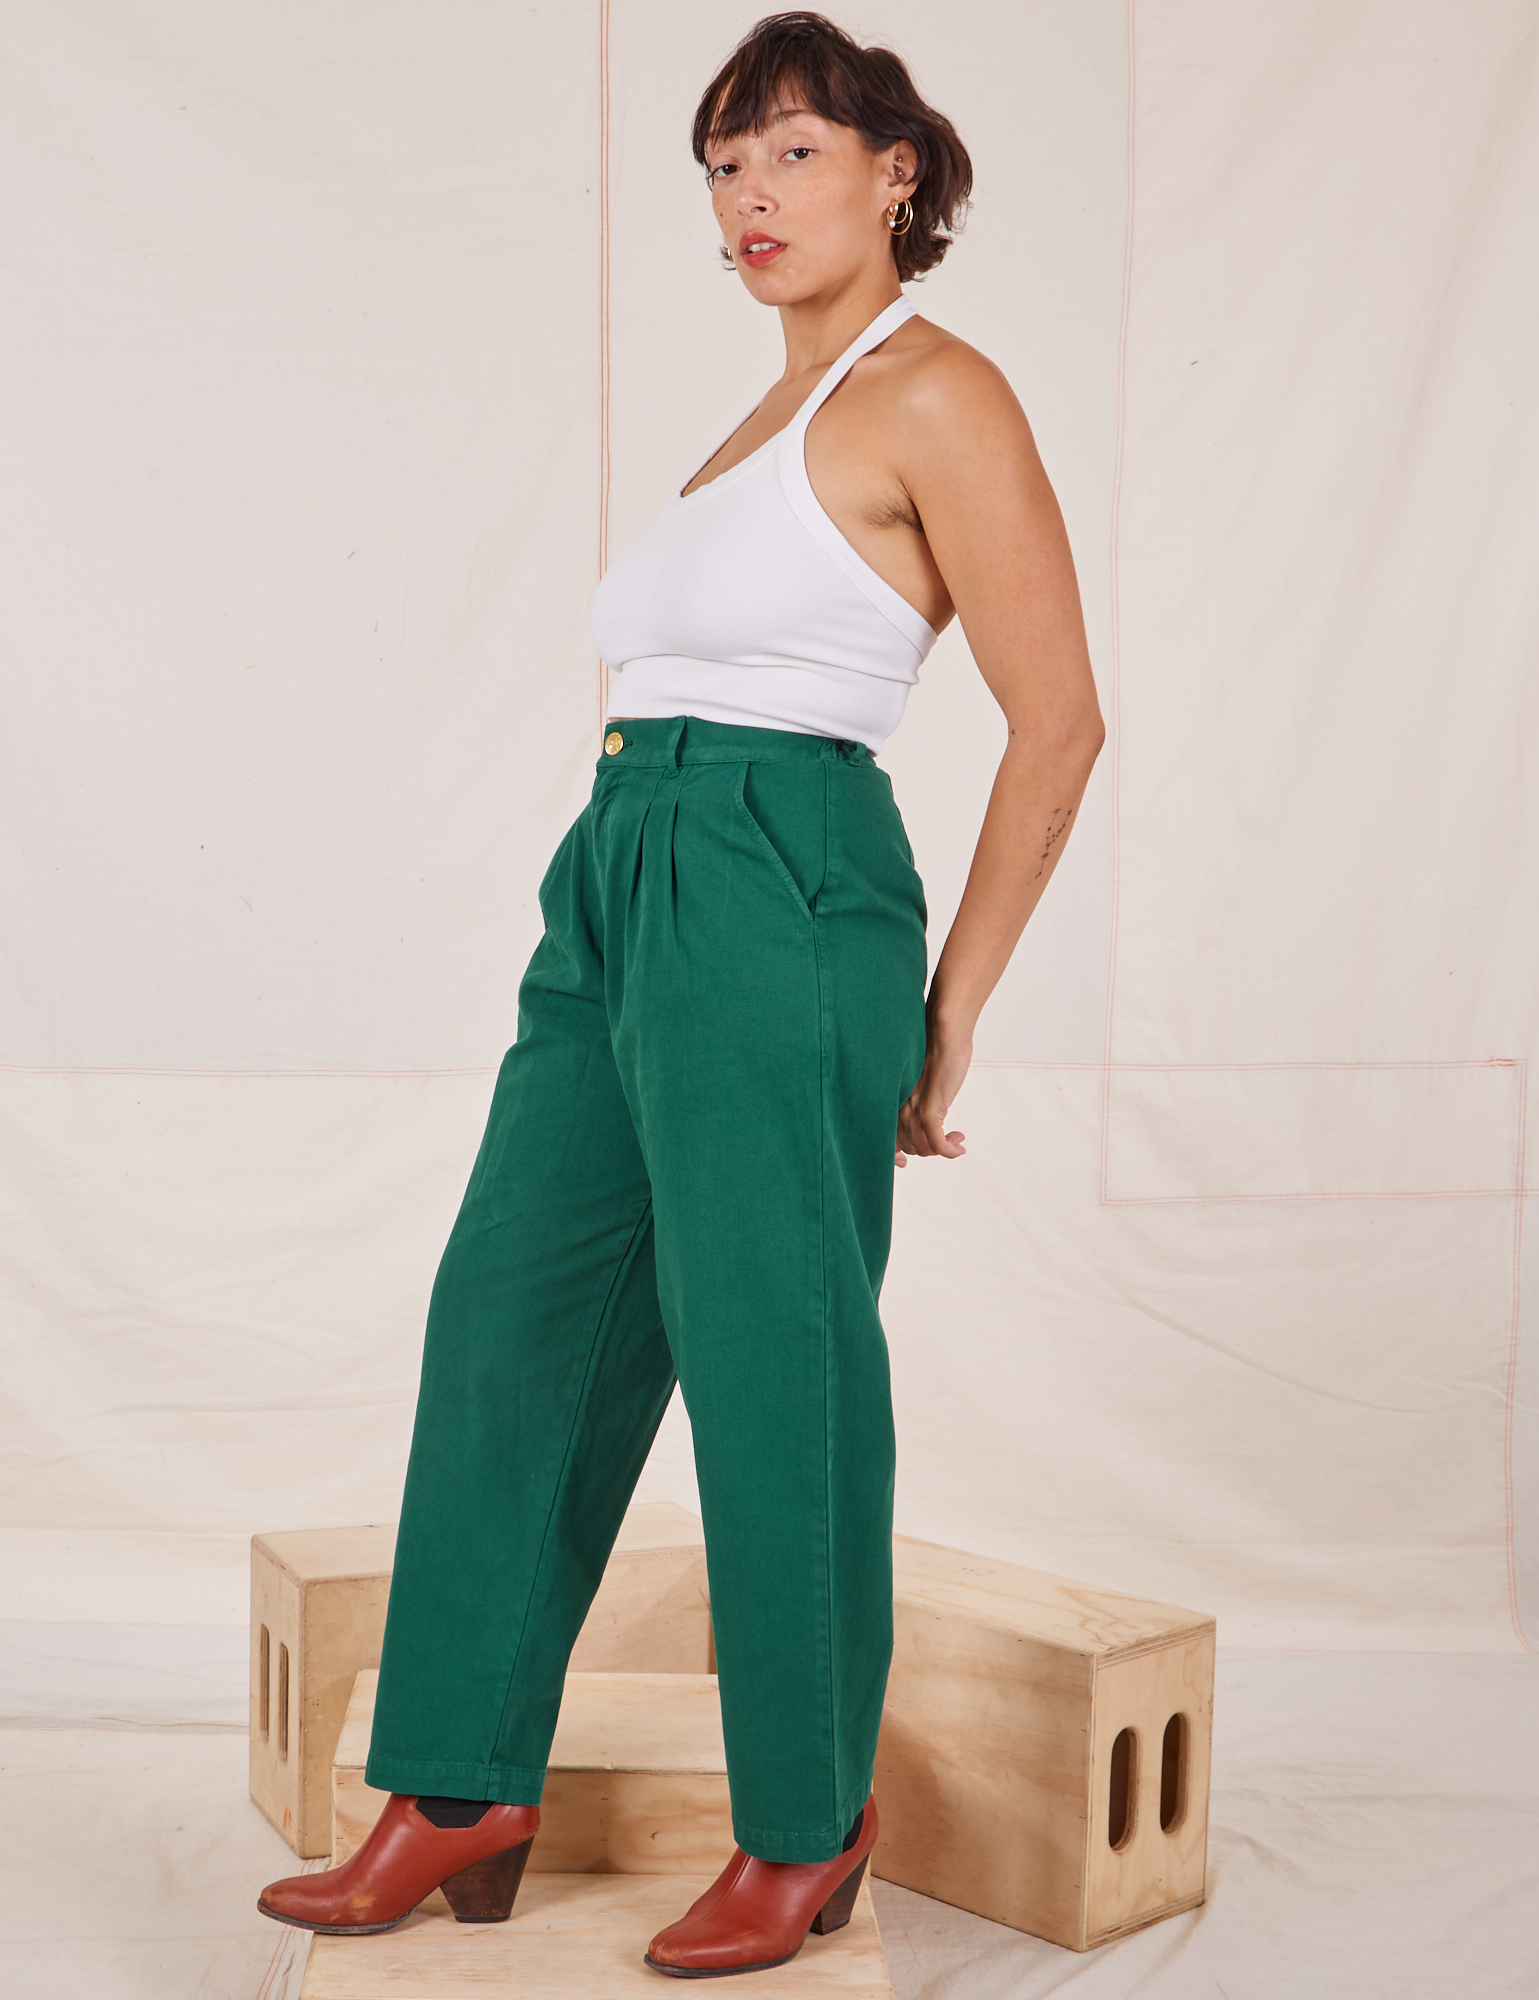 Side view of Heavyweight Trousers in Hunter Green and vintage off-white Halter Top worn by Tiara